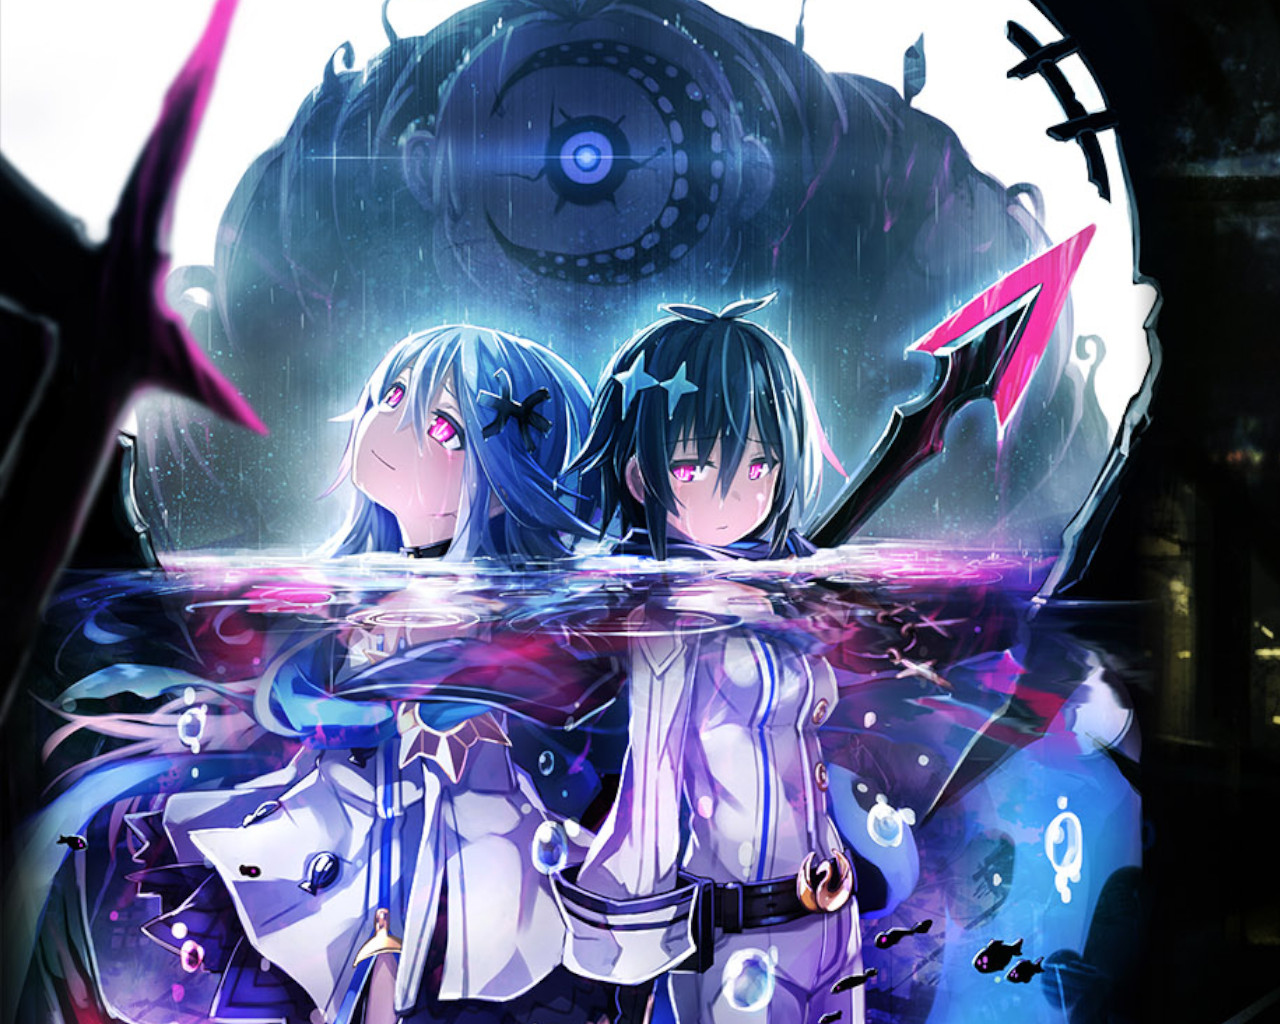 Mary Skelter 2